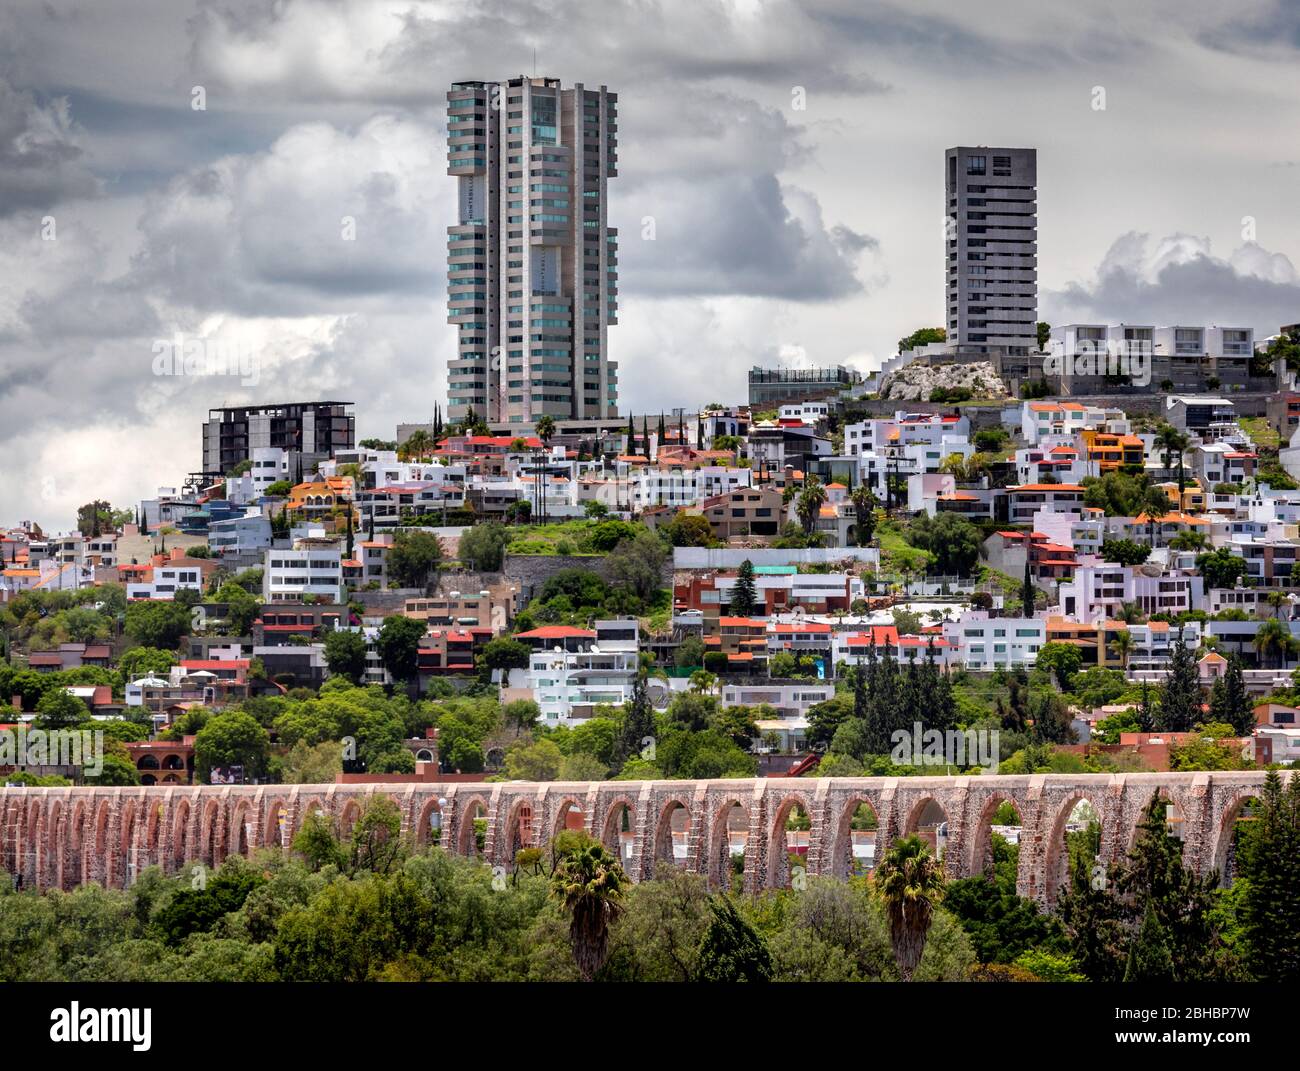 The old and the new combine in Queretaro, Mexico as high rise apartment buildings go up near the colonial aqueduct. Stock Photo